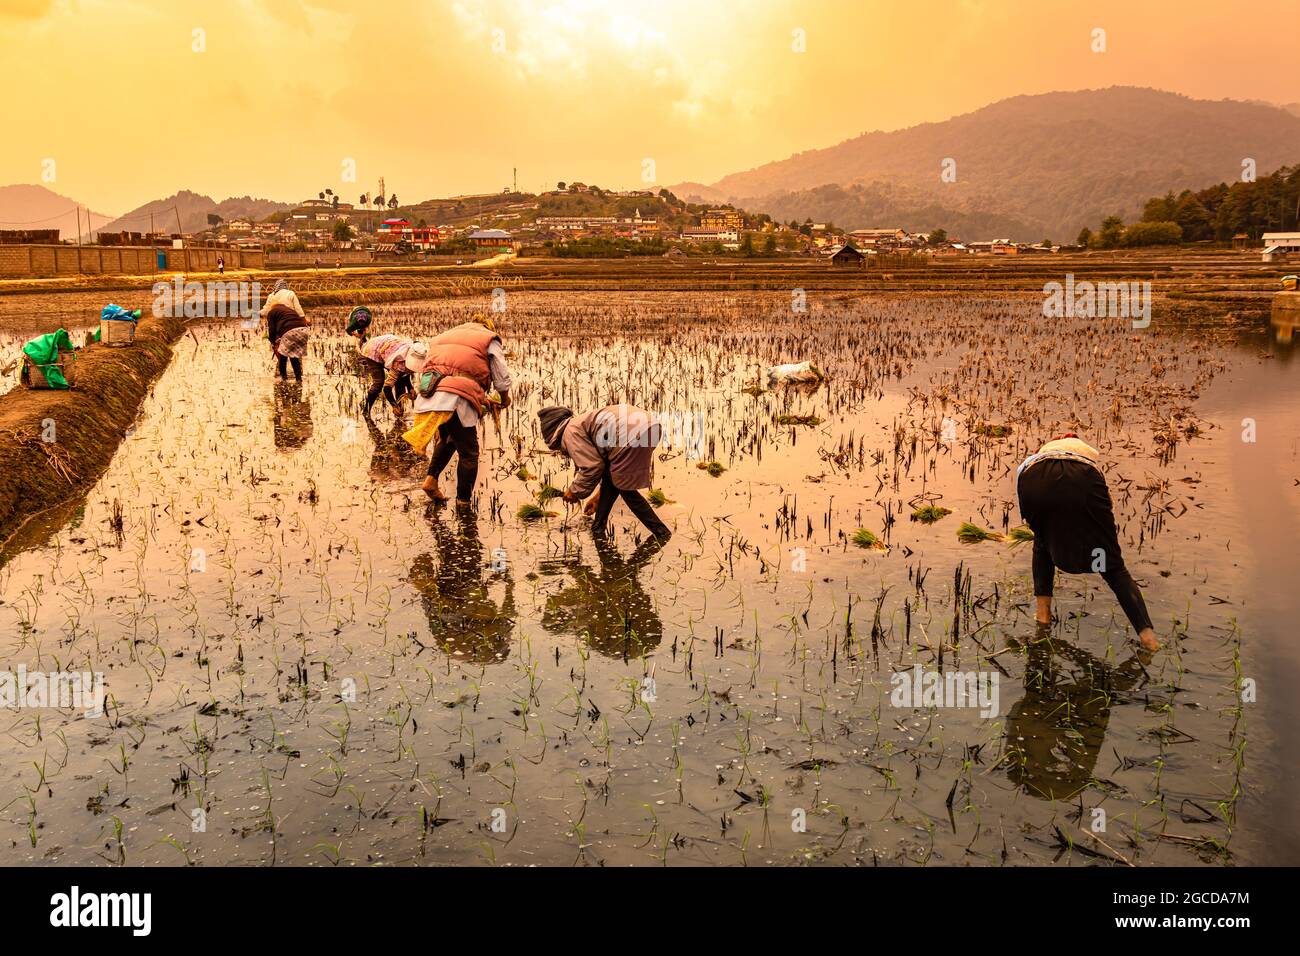 village farmers working in rice field with mountain backdrop and orange sky at morning image taken at ziro valley aruncahal pradessh india on Apr 13 2 Stock Photo